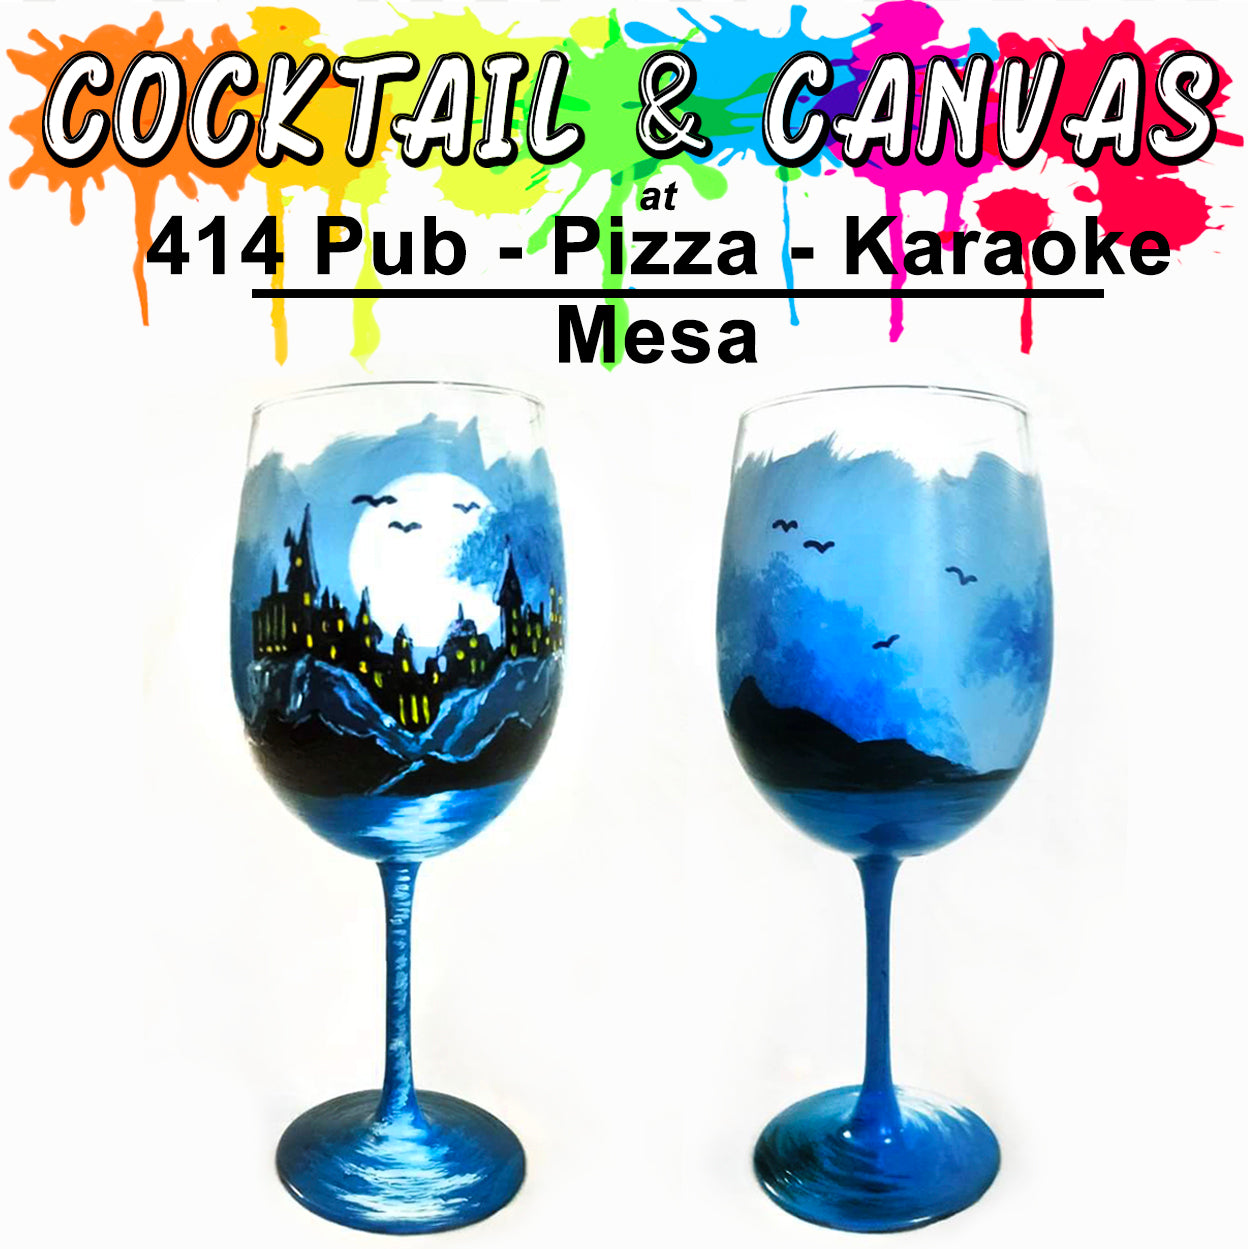 "Wizardly Wine Goblets" Paint and Sip at 414 Pub - Pizza - Karaoke on Sat, Nov 4 at 1pm